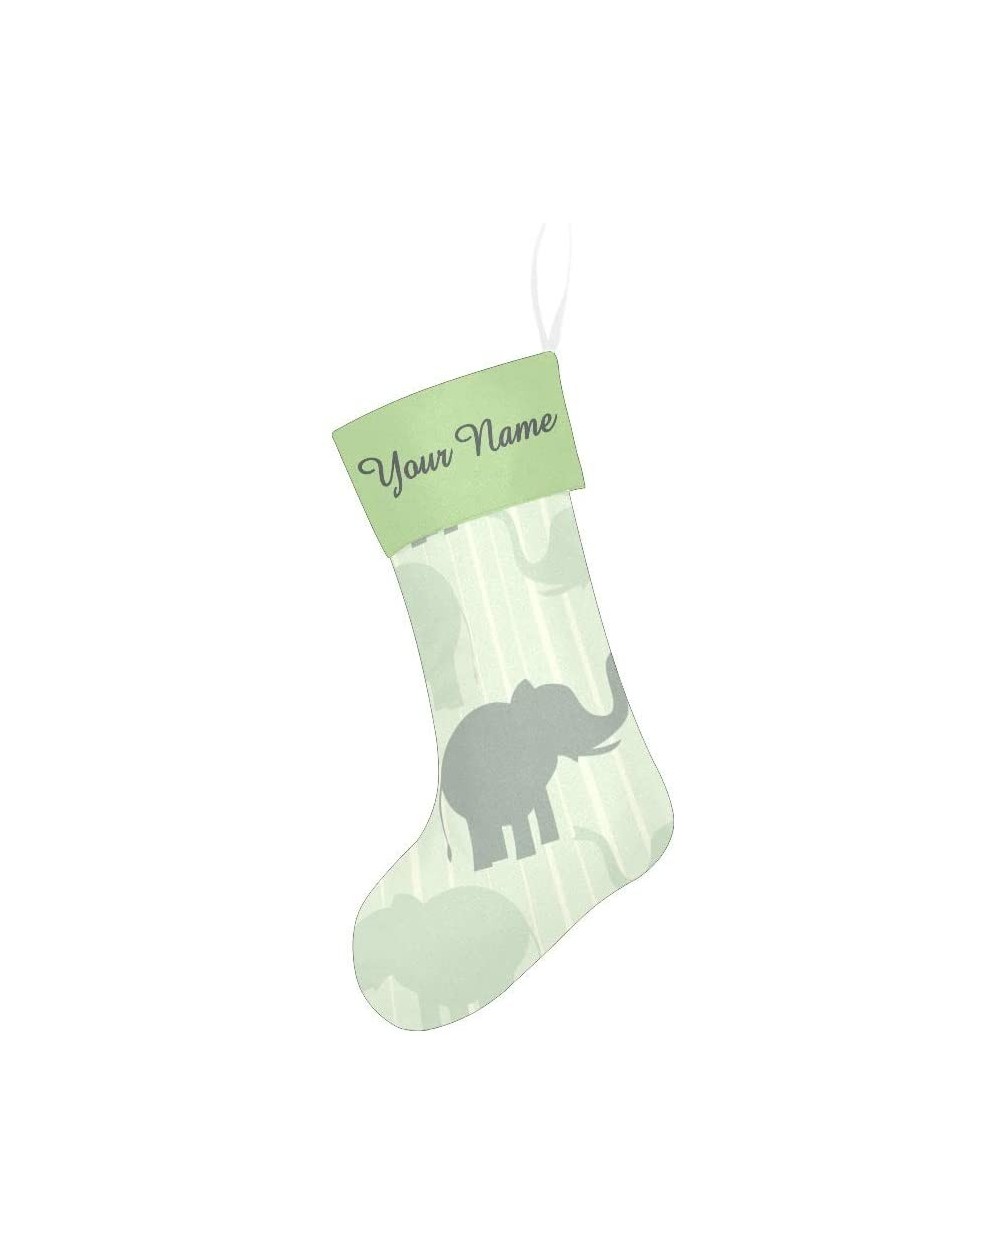 Stockings & Holders Christmas Stocking Custom Personalized Name Text Funny Elephant for Family Xmas Party Decor Gift 17.52 x ...